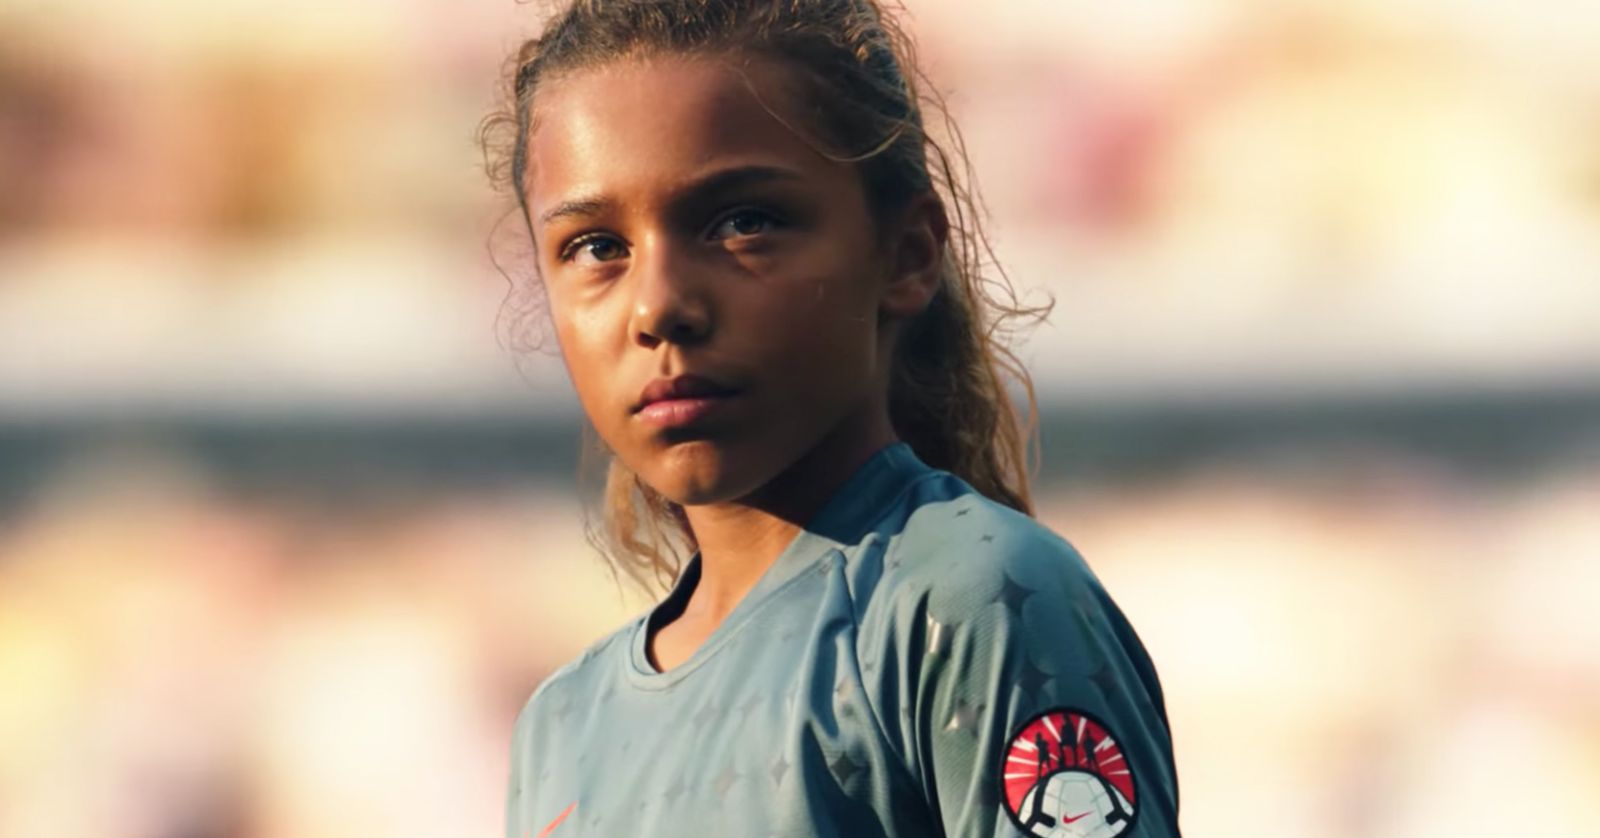 women's world cup commercial 2019